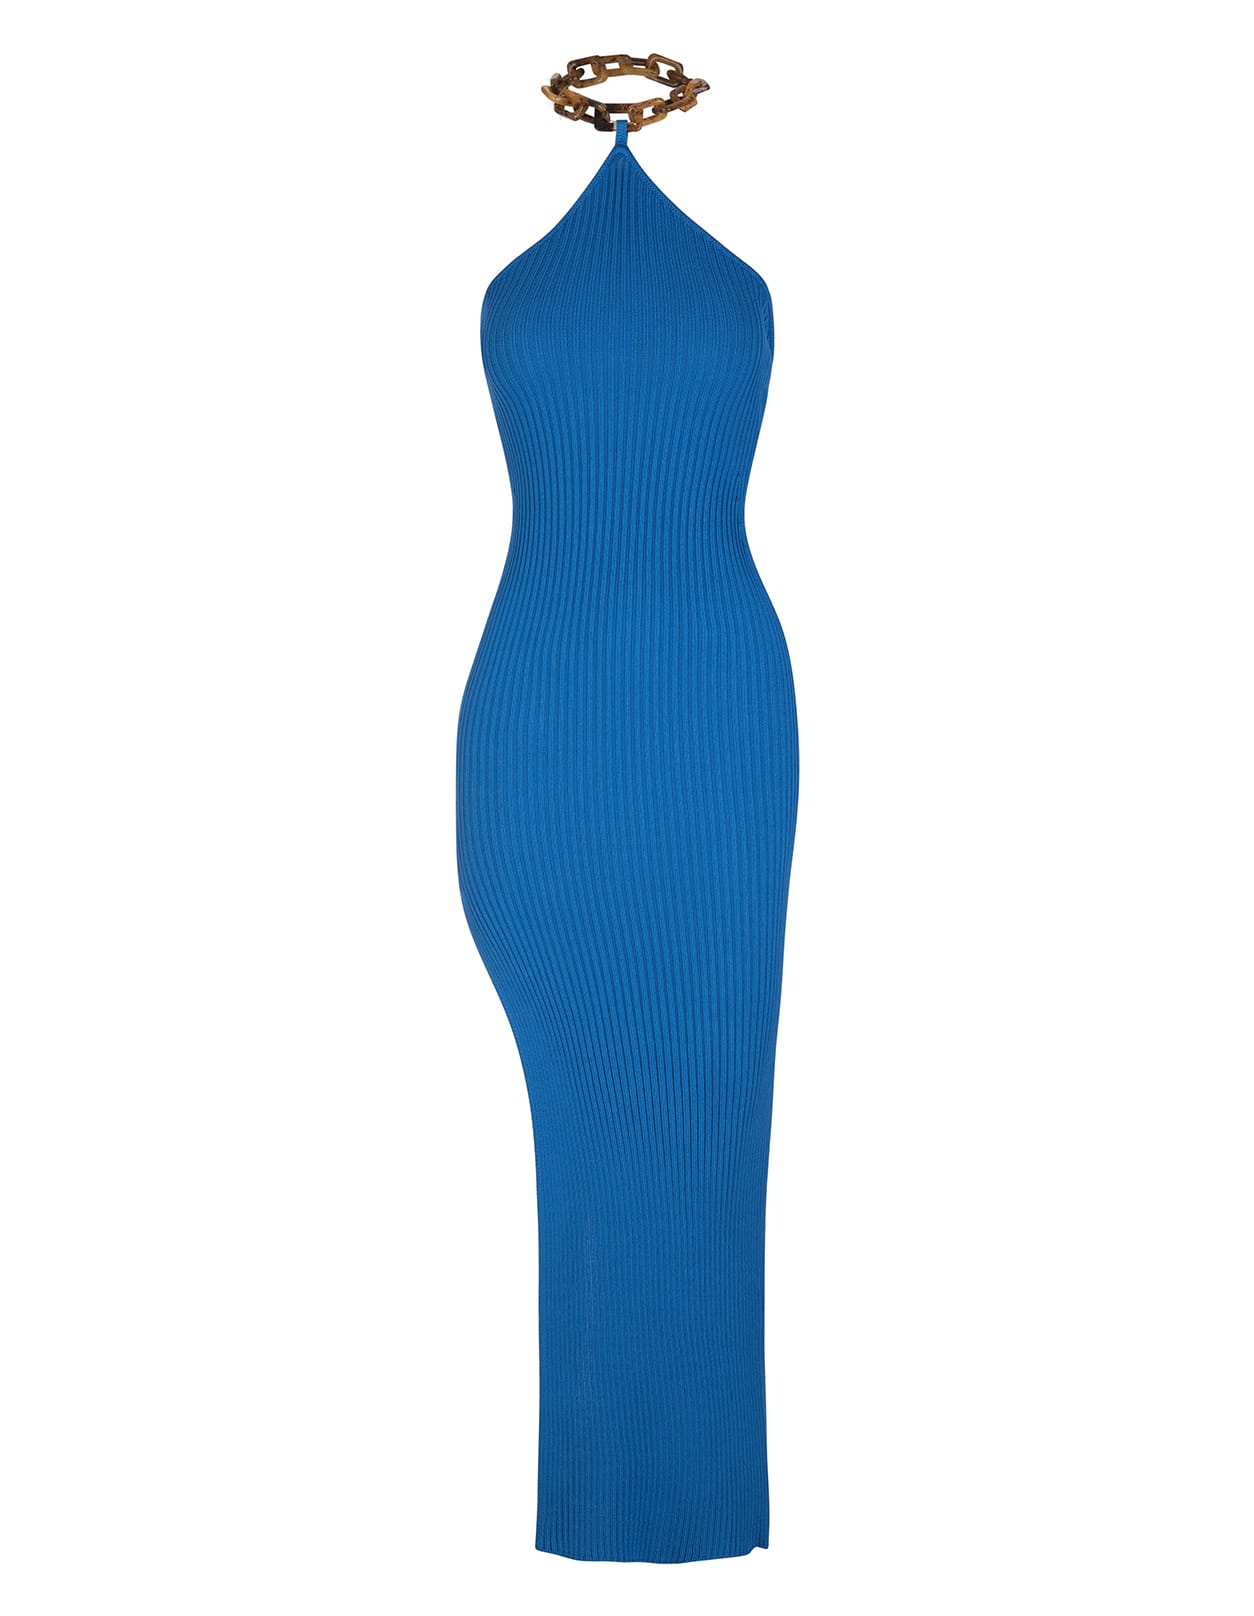 Giuseppe di Morabito Long Dress In Royal Blue Knit With Slit And Chain Detail